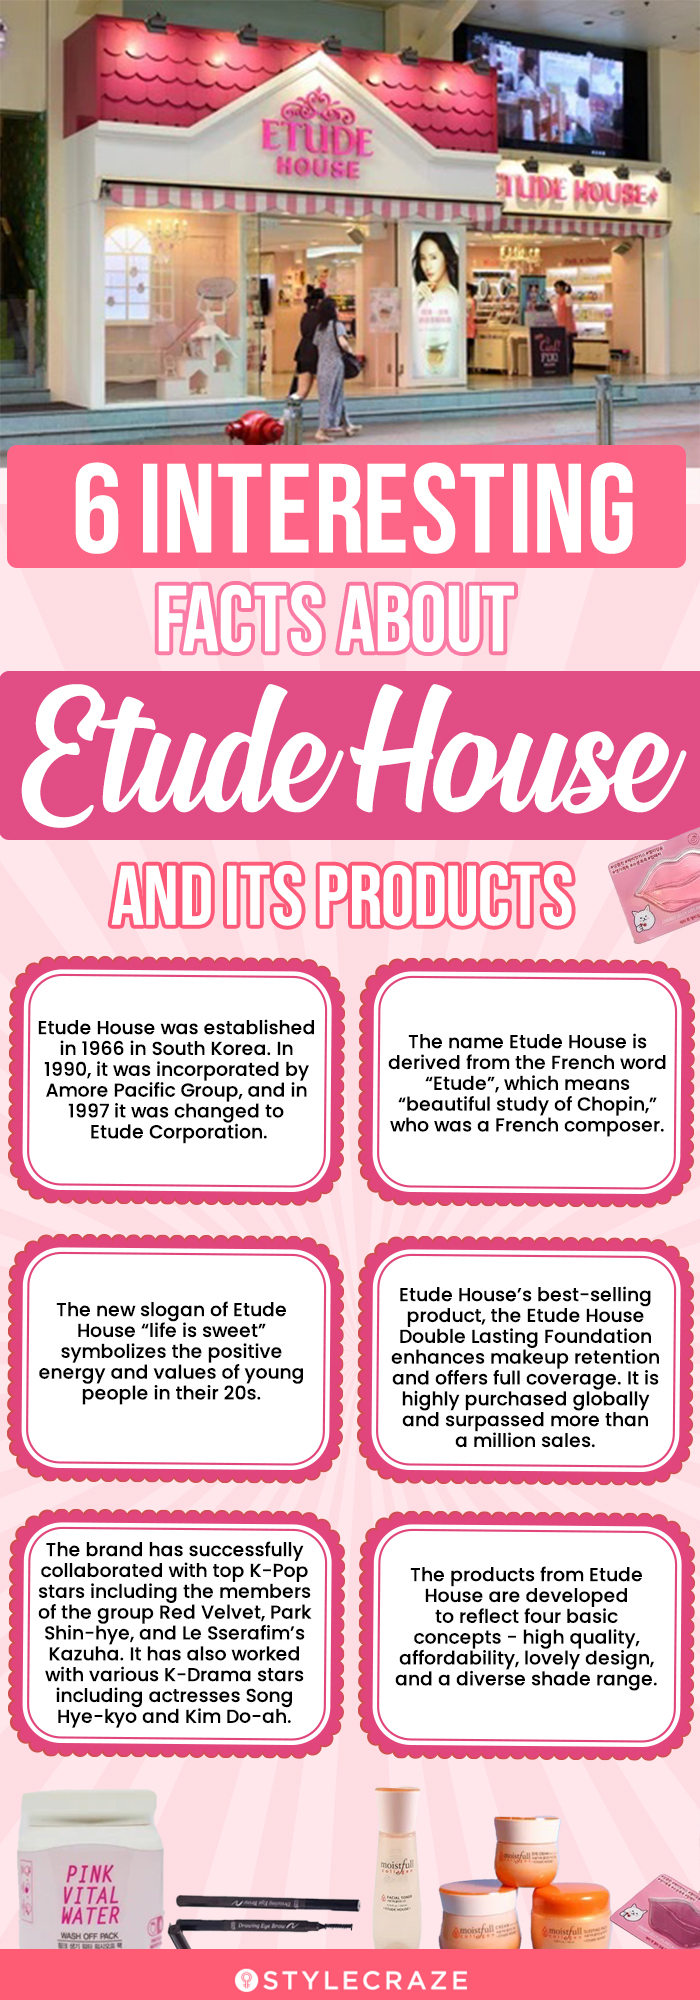 6 Interesting Facts About Etude House And Its Products (infographic)